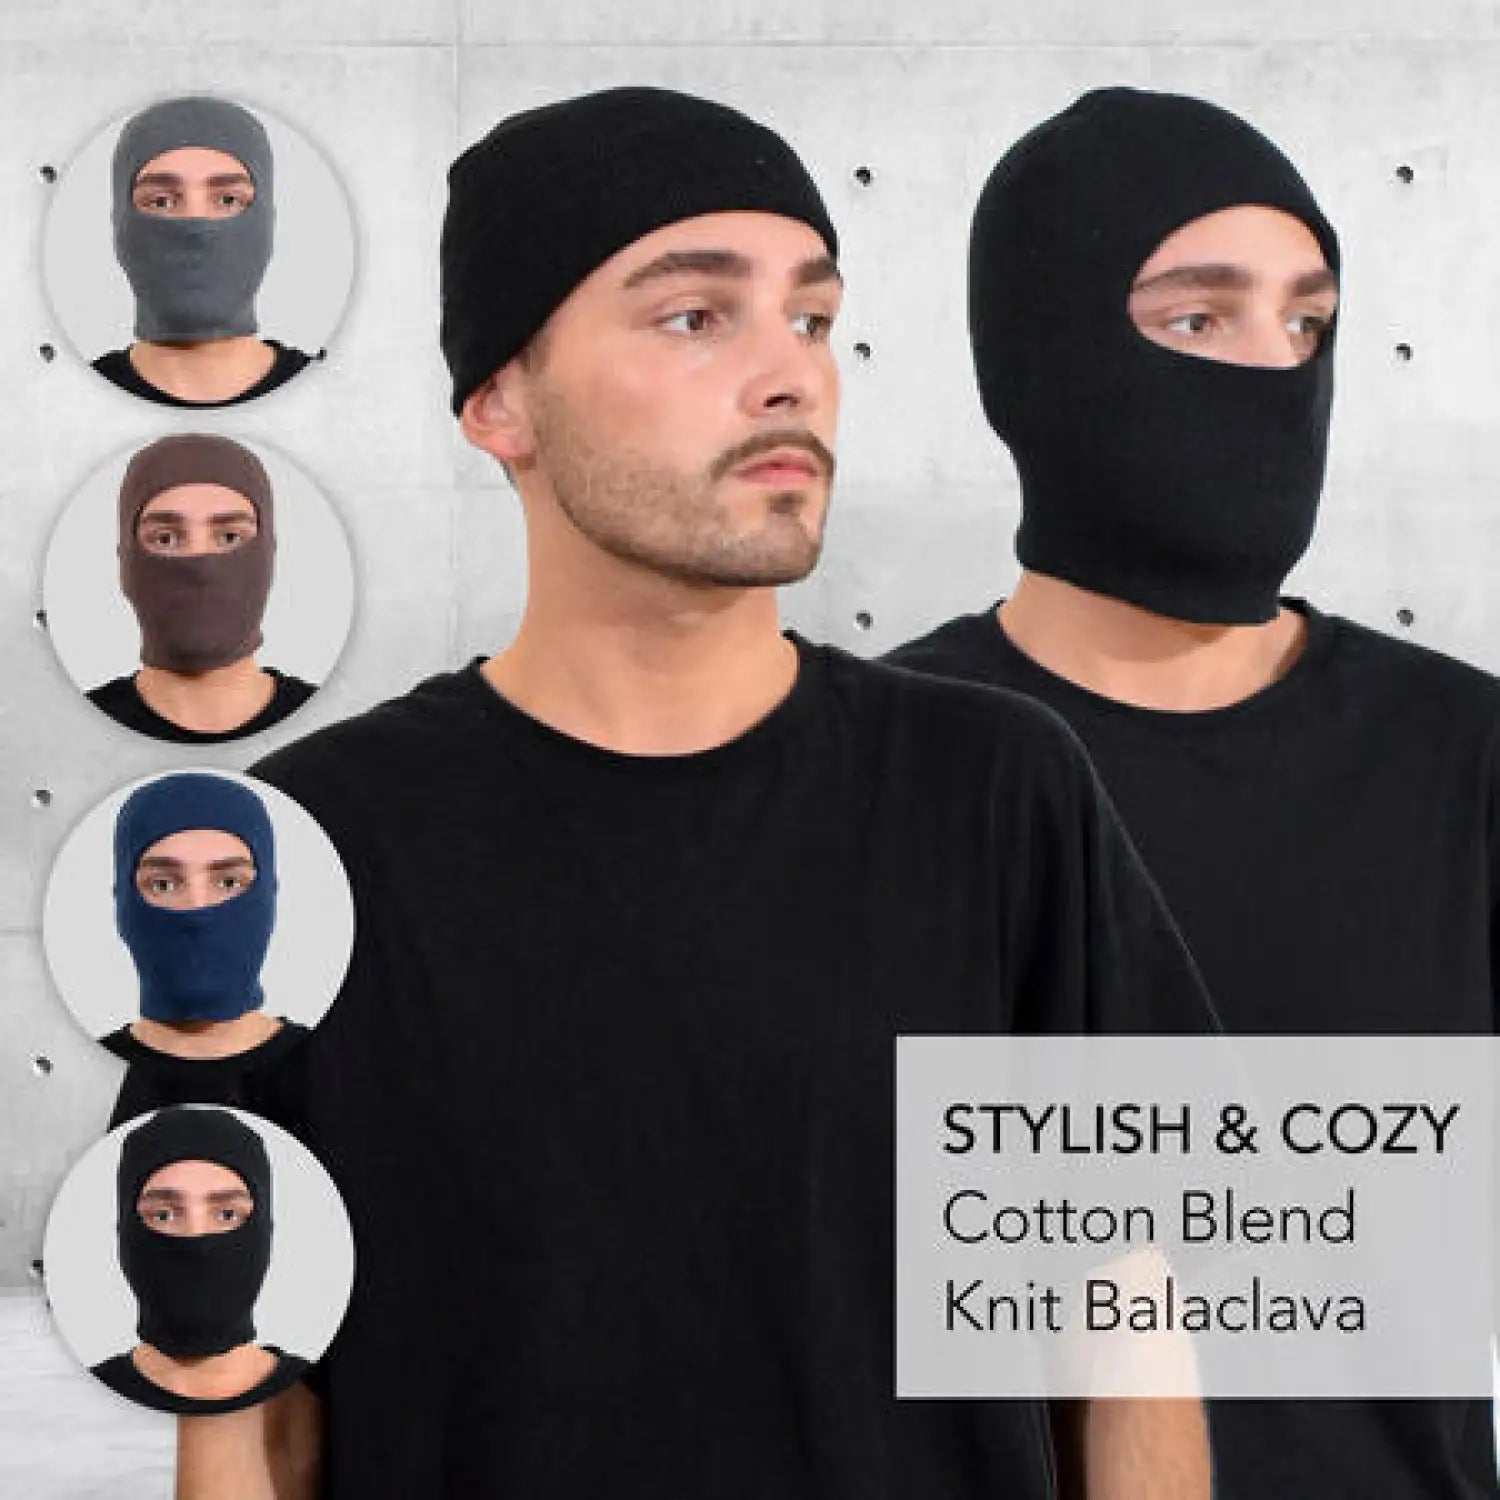 Man wearing black cotton blend hat and t-shirt advertised as Multifunctional Cotton Blend Balaclava Face Cover Hat.